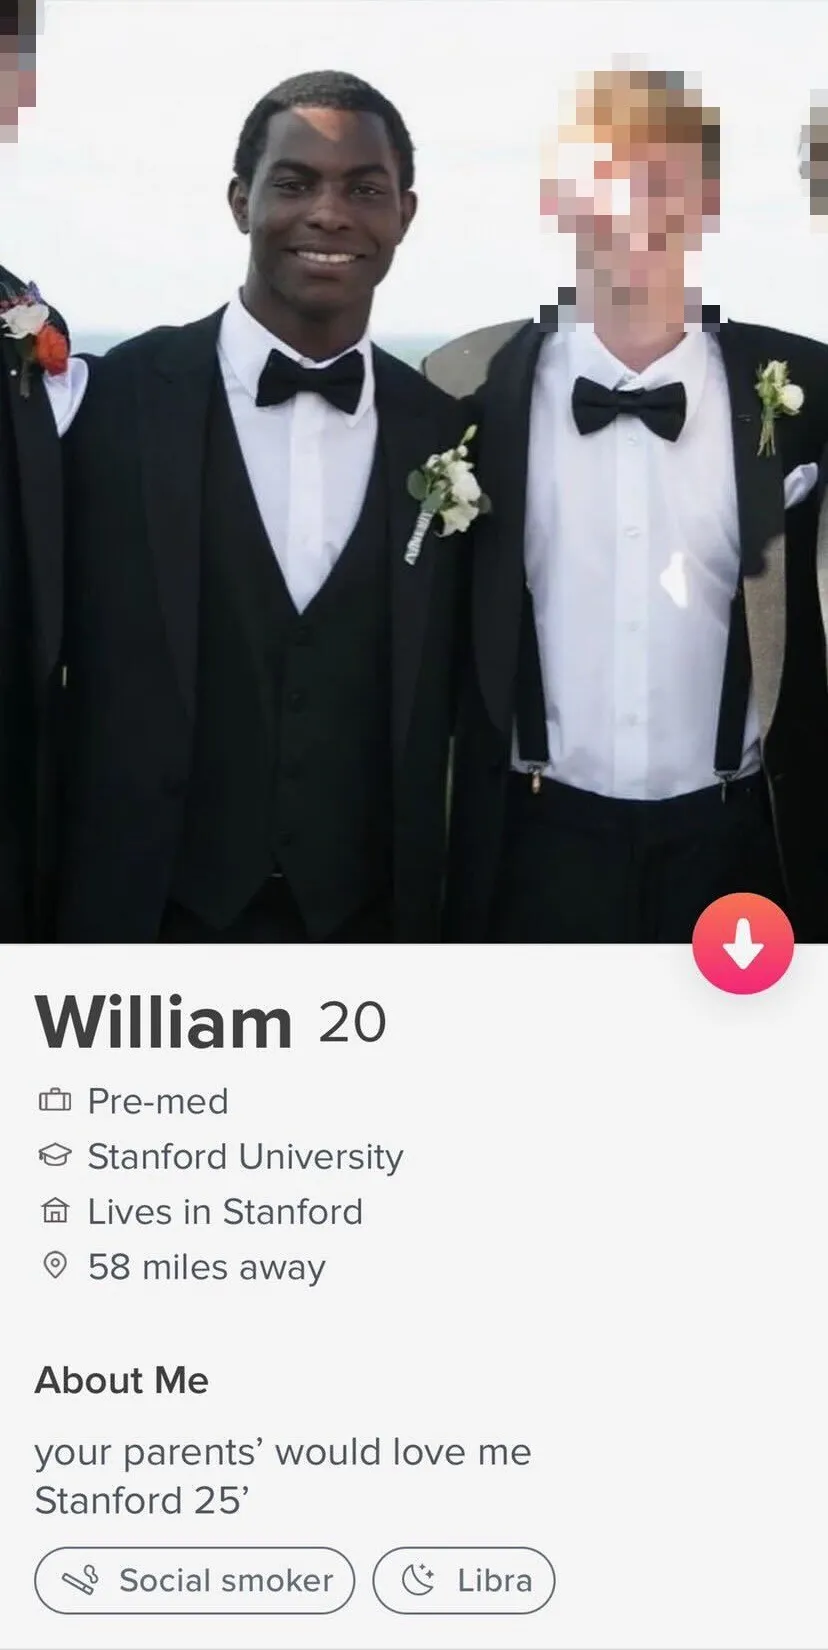 A Tinder profile for "William, 20, pre-med at Stanford." The profile says "your parents would love me." The photo shows Curry and a friend posing in black tuxes with white boutonnieres.